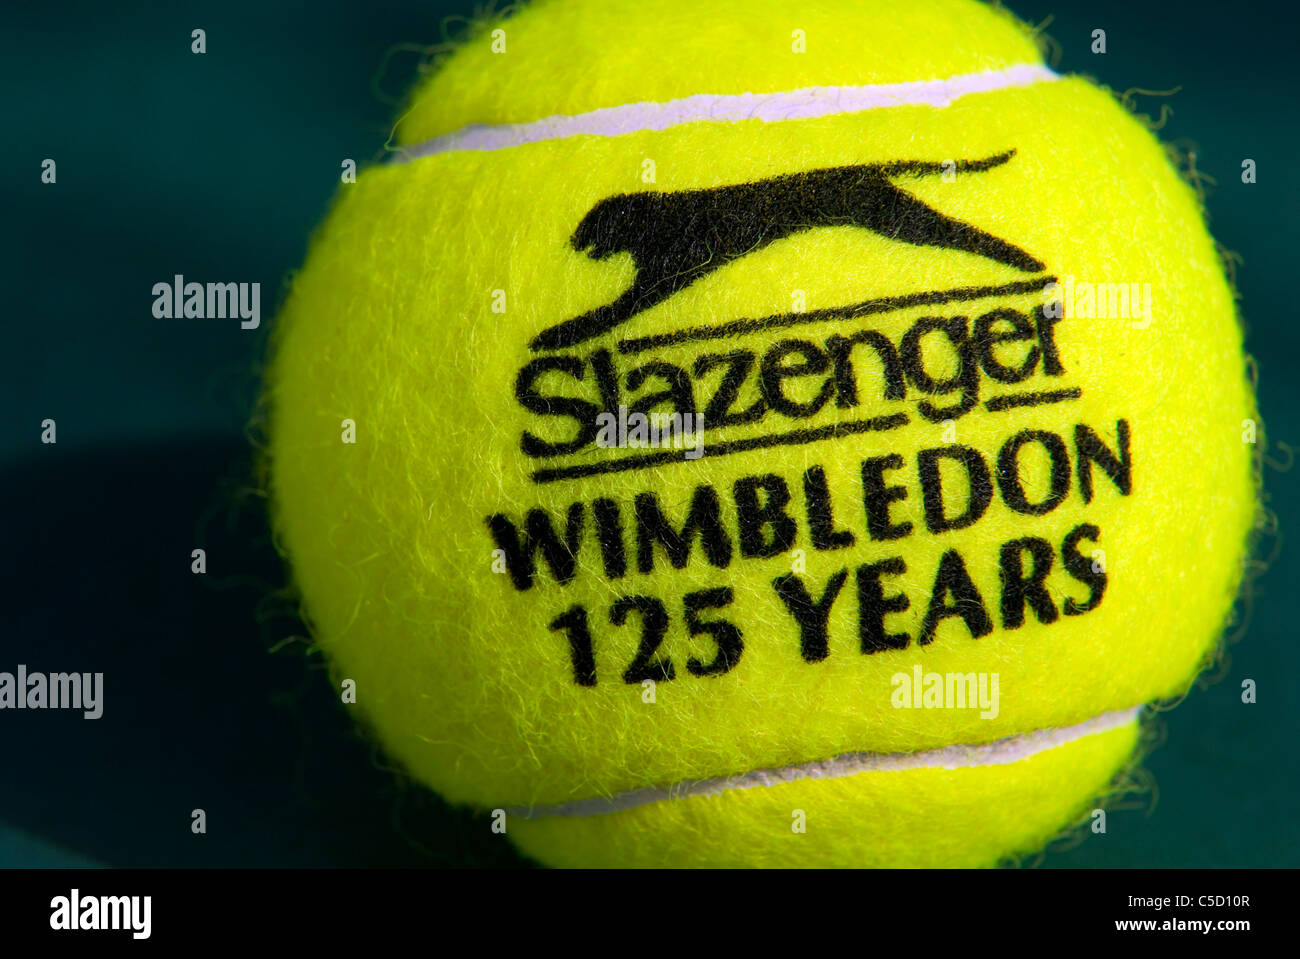 Close up view of a Slazenger 125th anniversary tennis ball during the 2011  Wimbledon Tennis Championships Stock Photo - Alamy